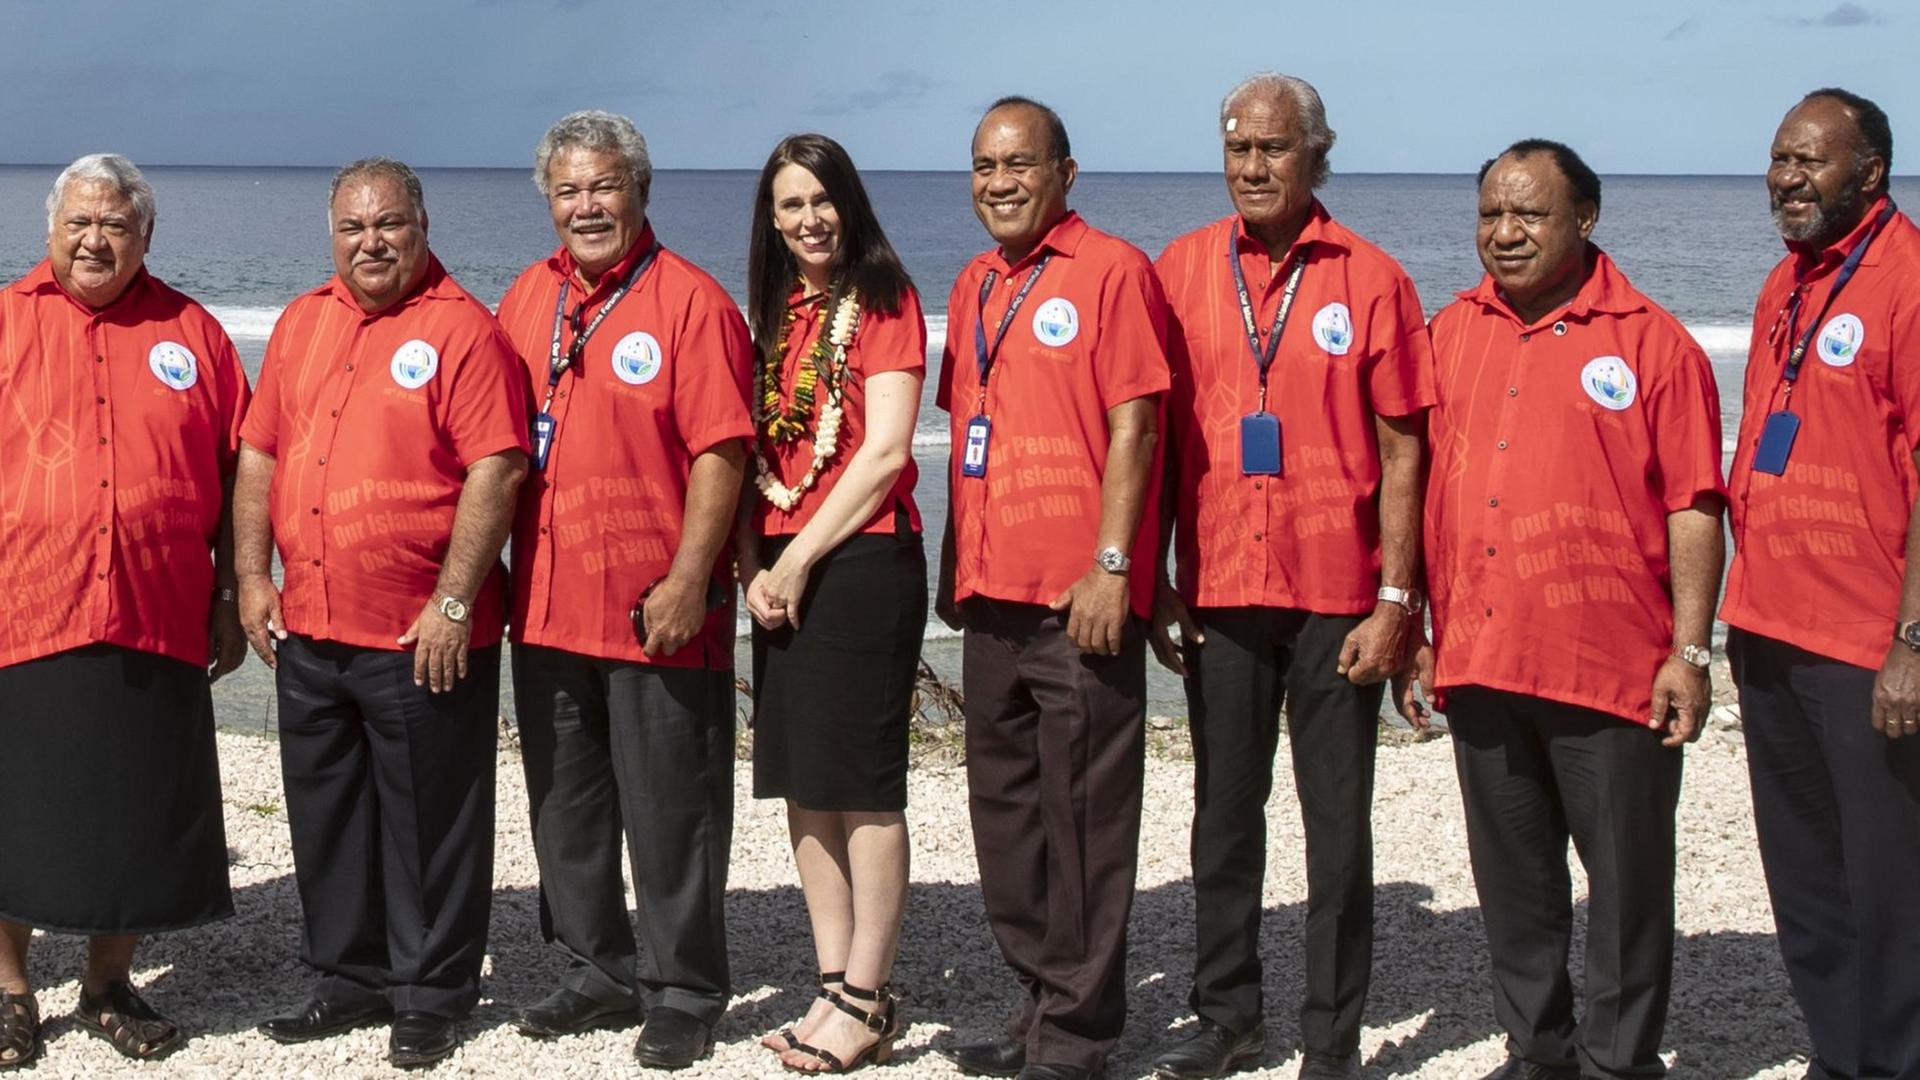 Nauru President Baron Waqa, second from left, poses with New Zealand Prime Minister Jacinda Ardern, fourth from left and other Pacific leaders for a group photo during the Pacific Islands Forum in Nauru, Wednesday, Sept. 5, 2018. (Jason Oxenham/Pool Photo via AP)